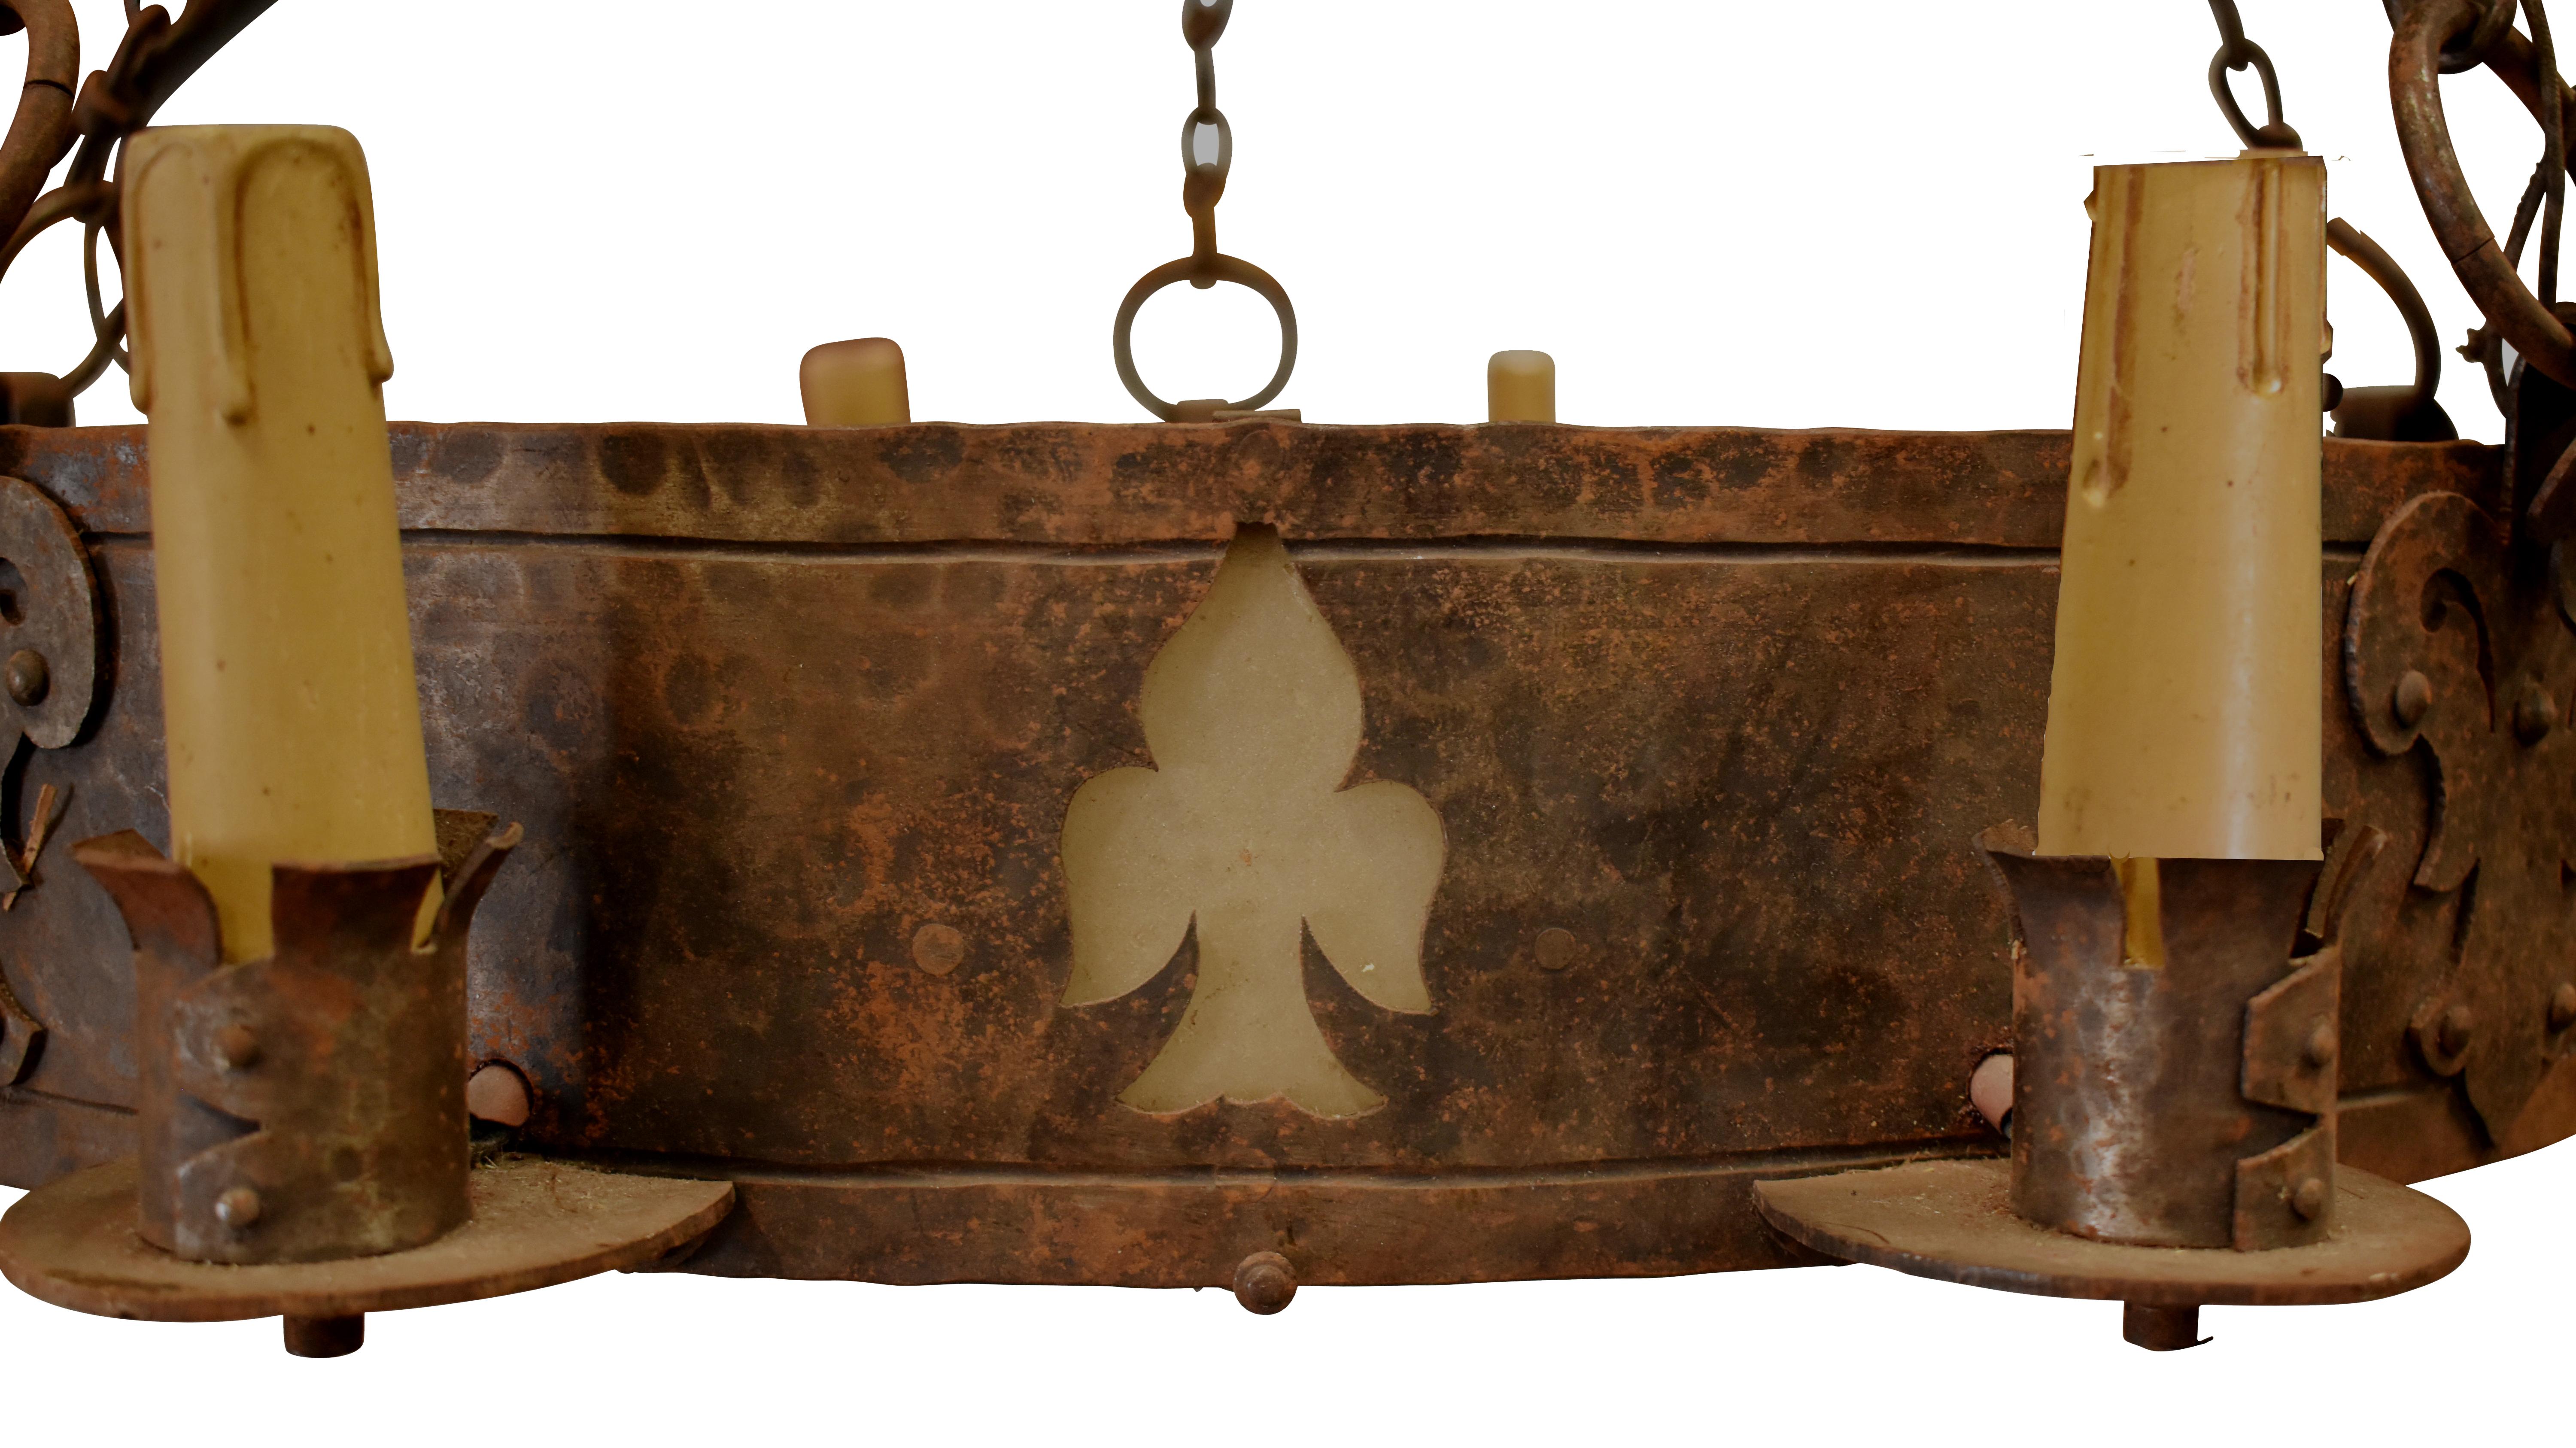 Large vintage hand-forged iron chandelier brings light and a strong statement to a room. Fleur de Lis cutouts and bracket details give added interest. European wiring – will need to be rewired.

This chandelier could be 19th Century but marked it